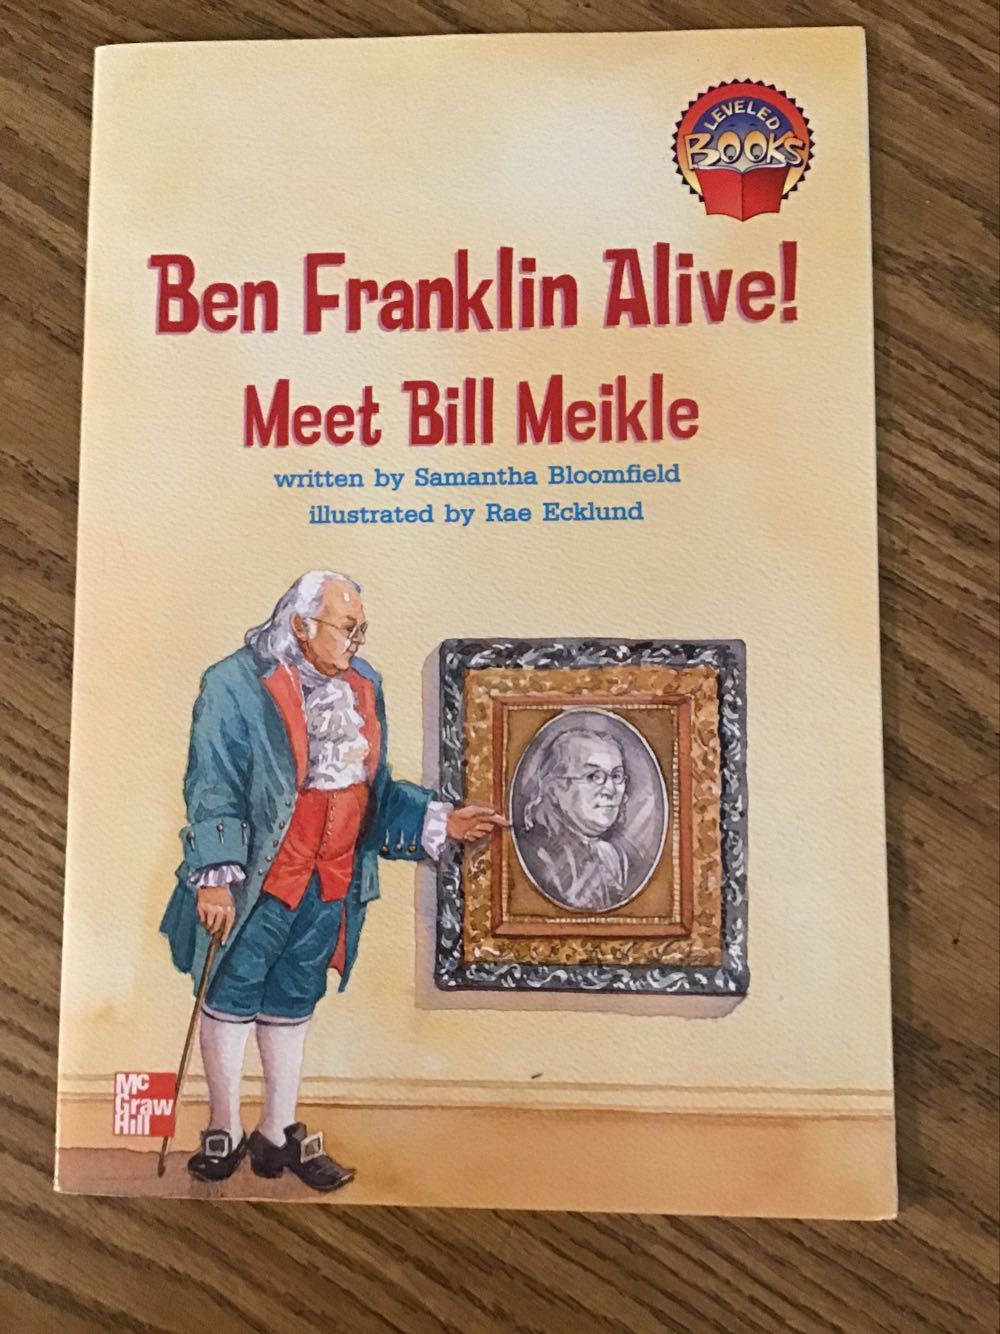 Ben Franklin Alive! - Samantha Bloomfield book collectible [Barcode 9780021851355] - Main Image 1